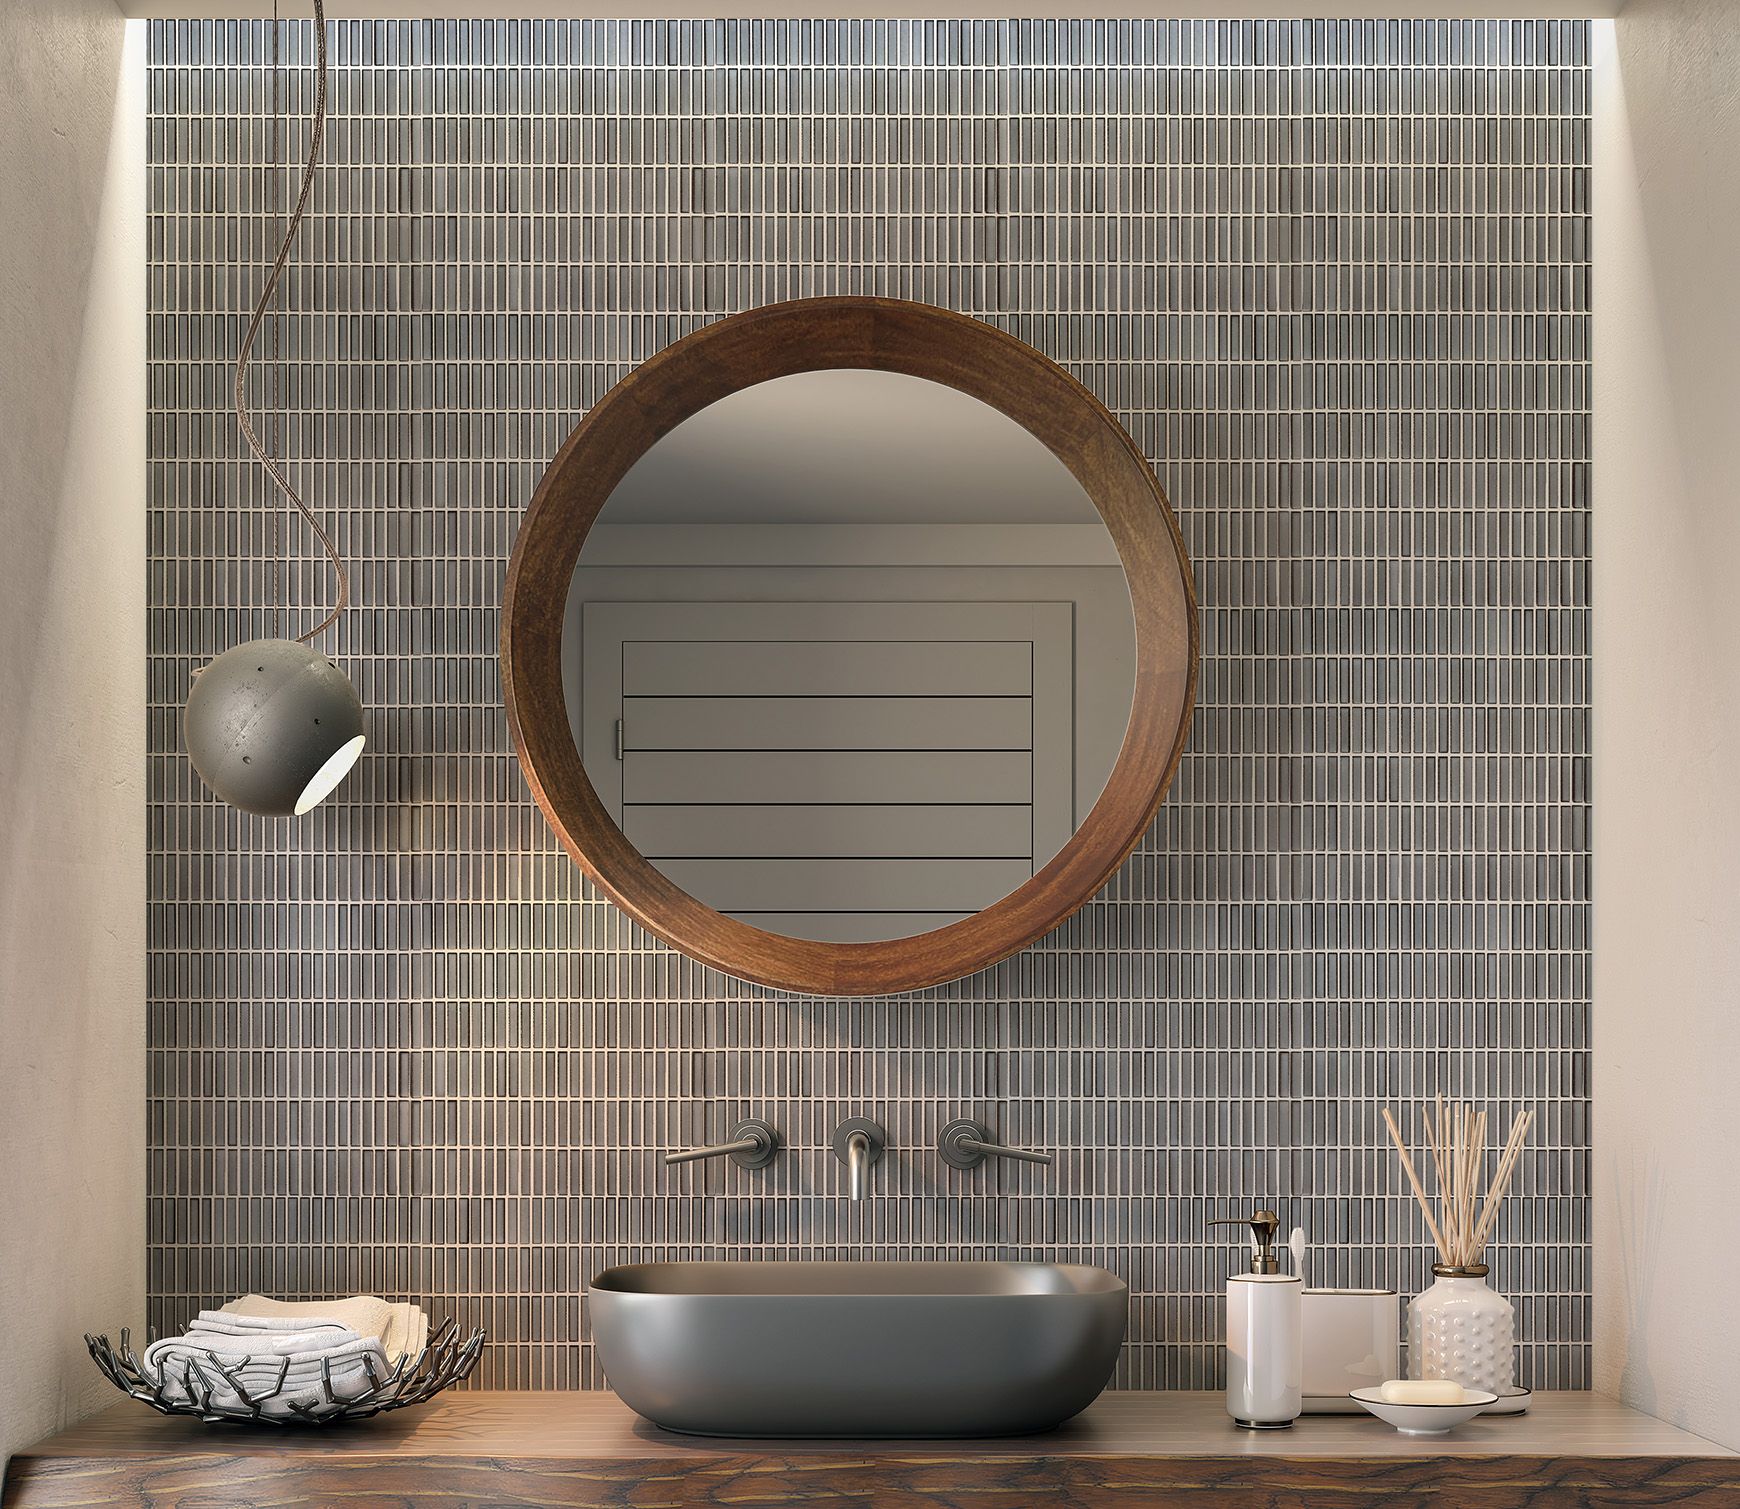 A dark grey sink on a wooden table, featuring a matching sink fixture, wooden round mirror and Gray Porcelain mosaic tiles on the wall.